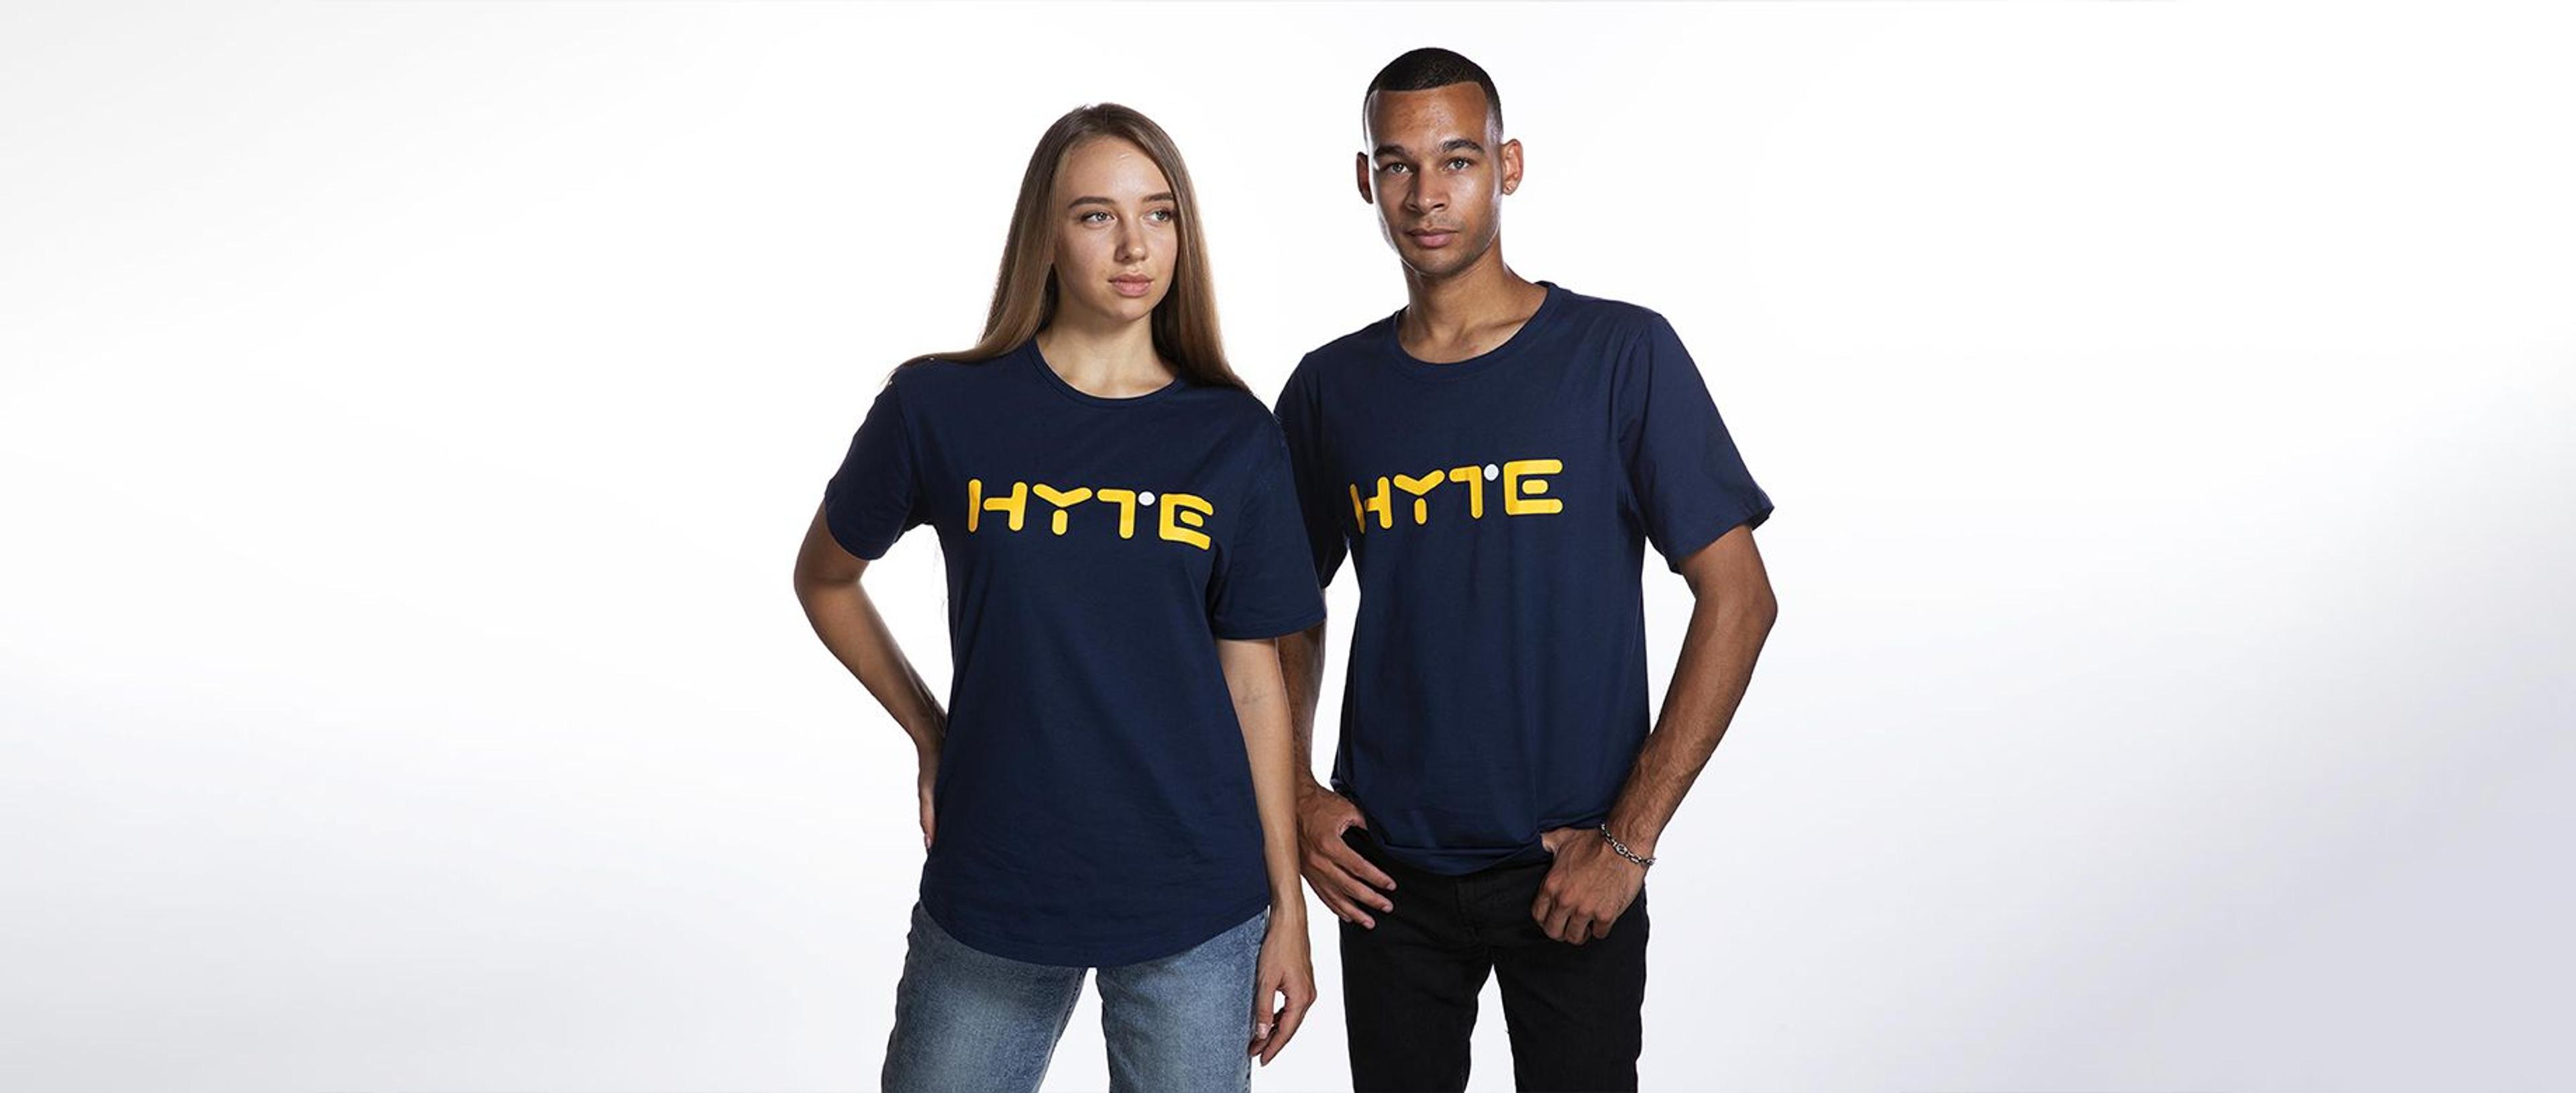 two models wear the T-shirt